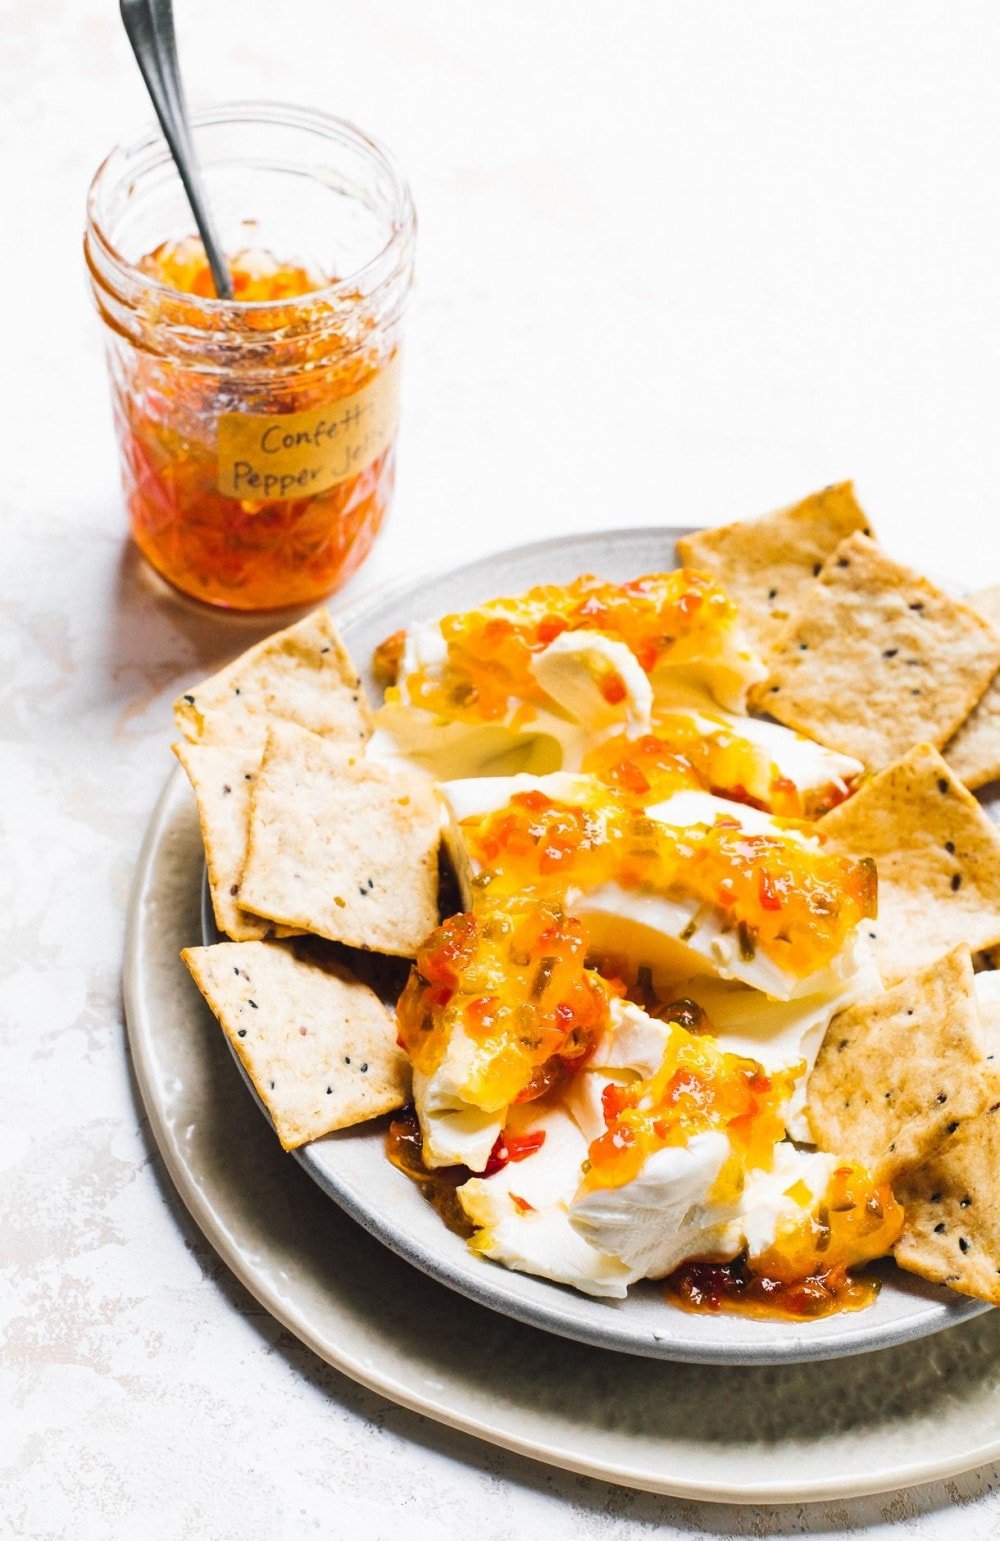 hot pepper jelly swirled into cream cheese, surrounded by crackers on a plate with the jar of pepper jelly in backround